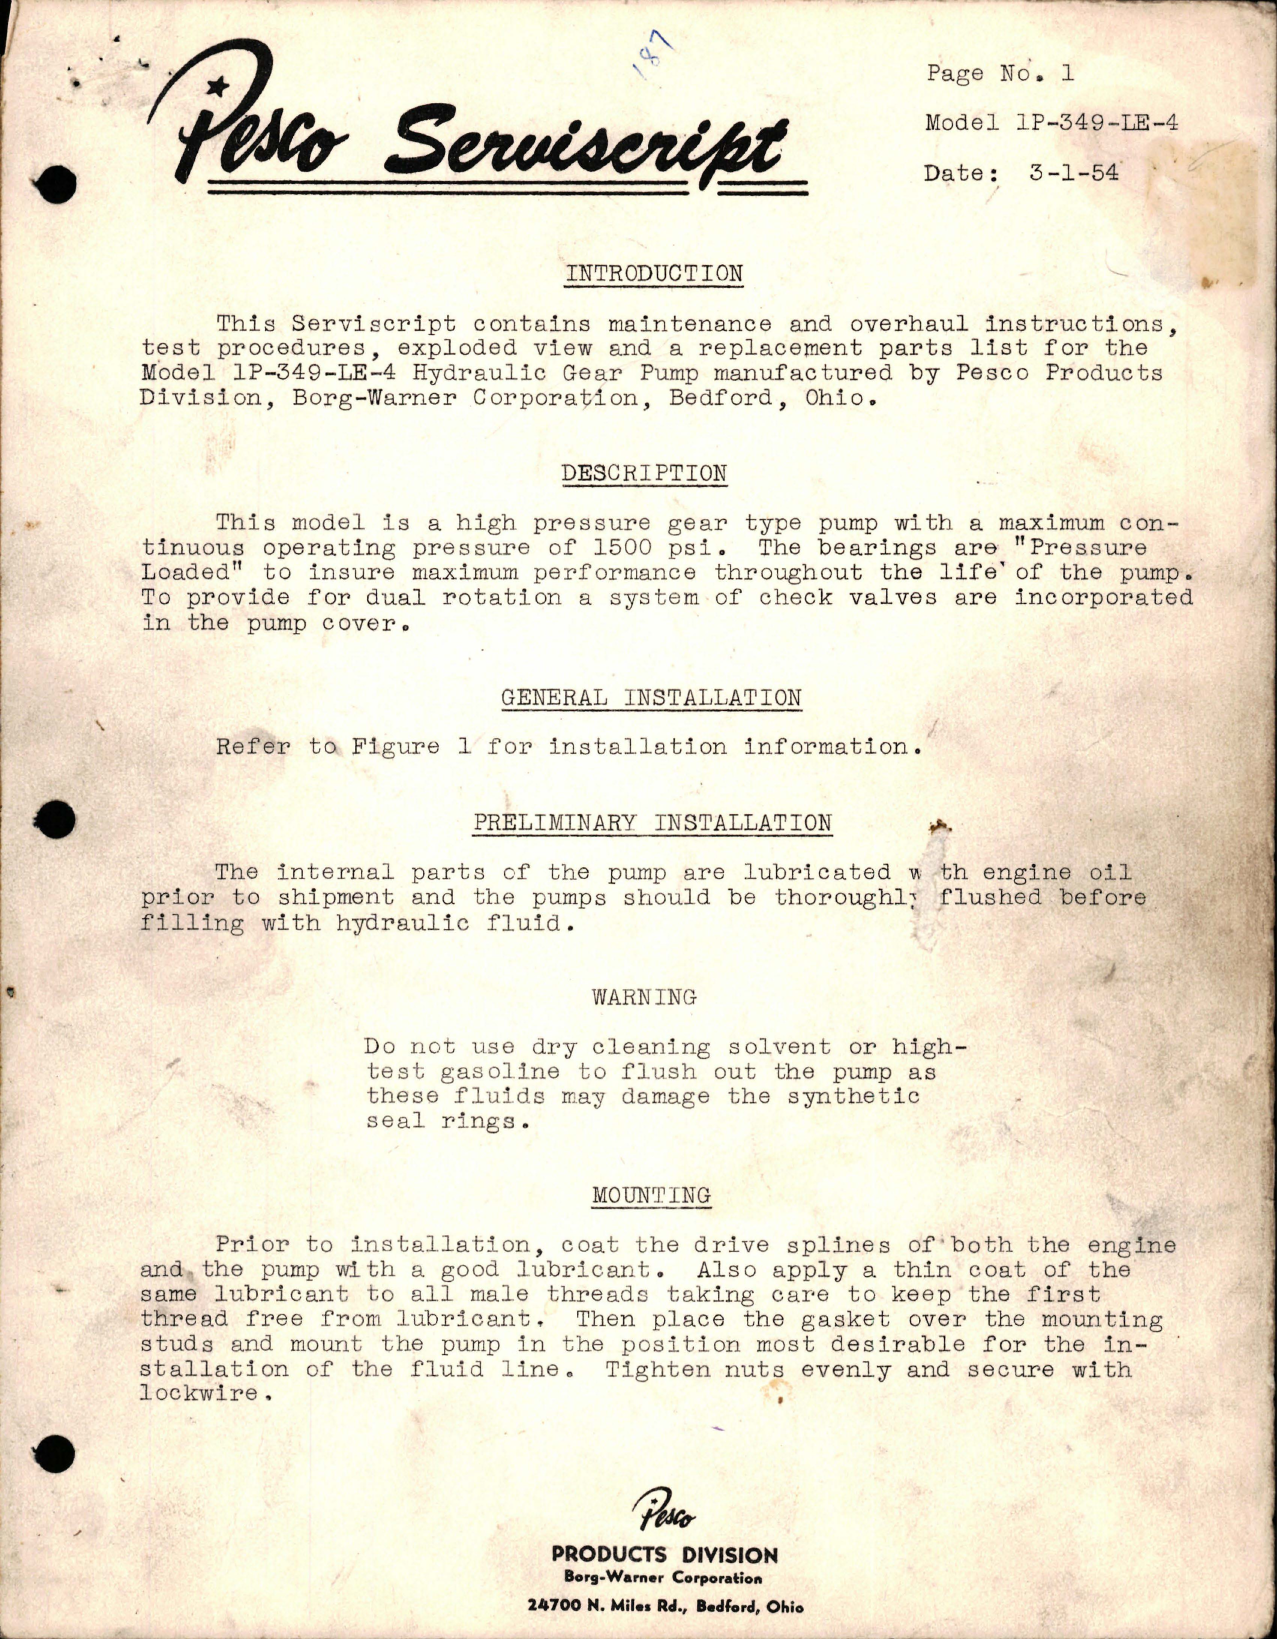 Sample page 1 from AirCorps Library document: Pesco Serviscript Maintenance and Overhaul Instructions for Hydraulic Gear Pump - Model 1P-349-LE-4